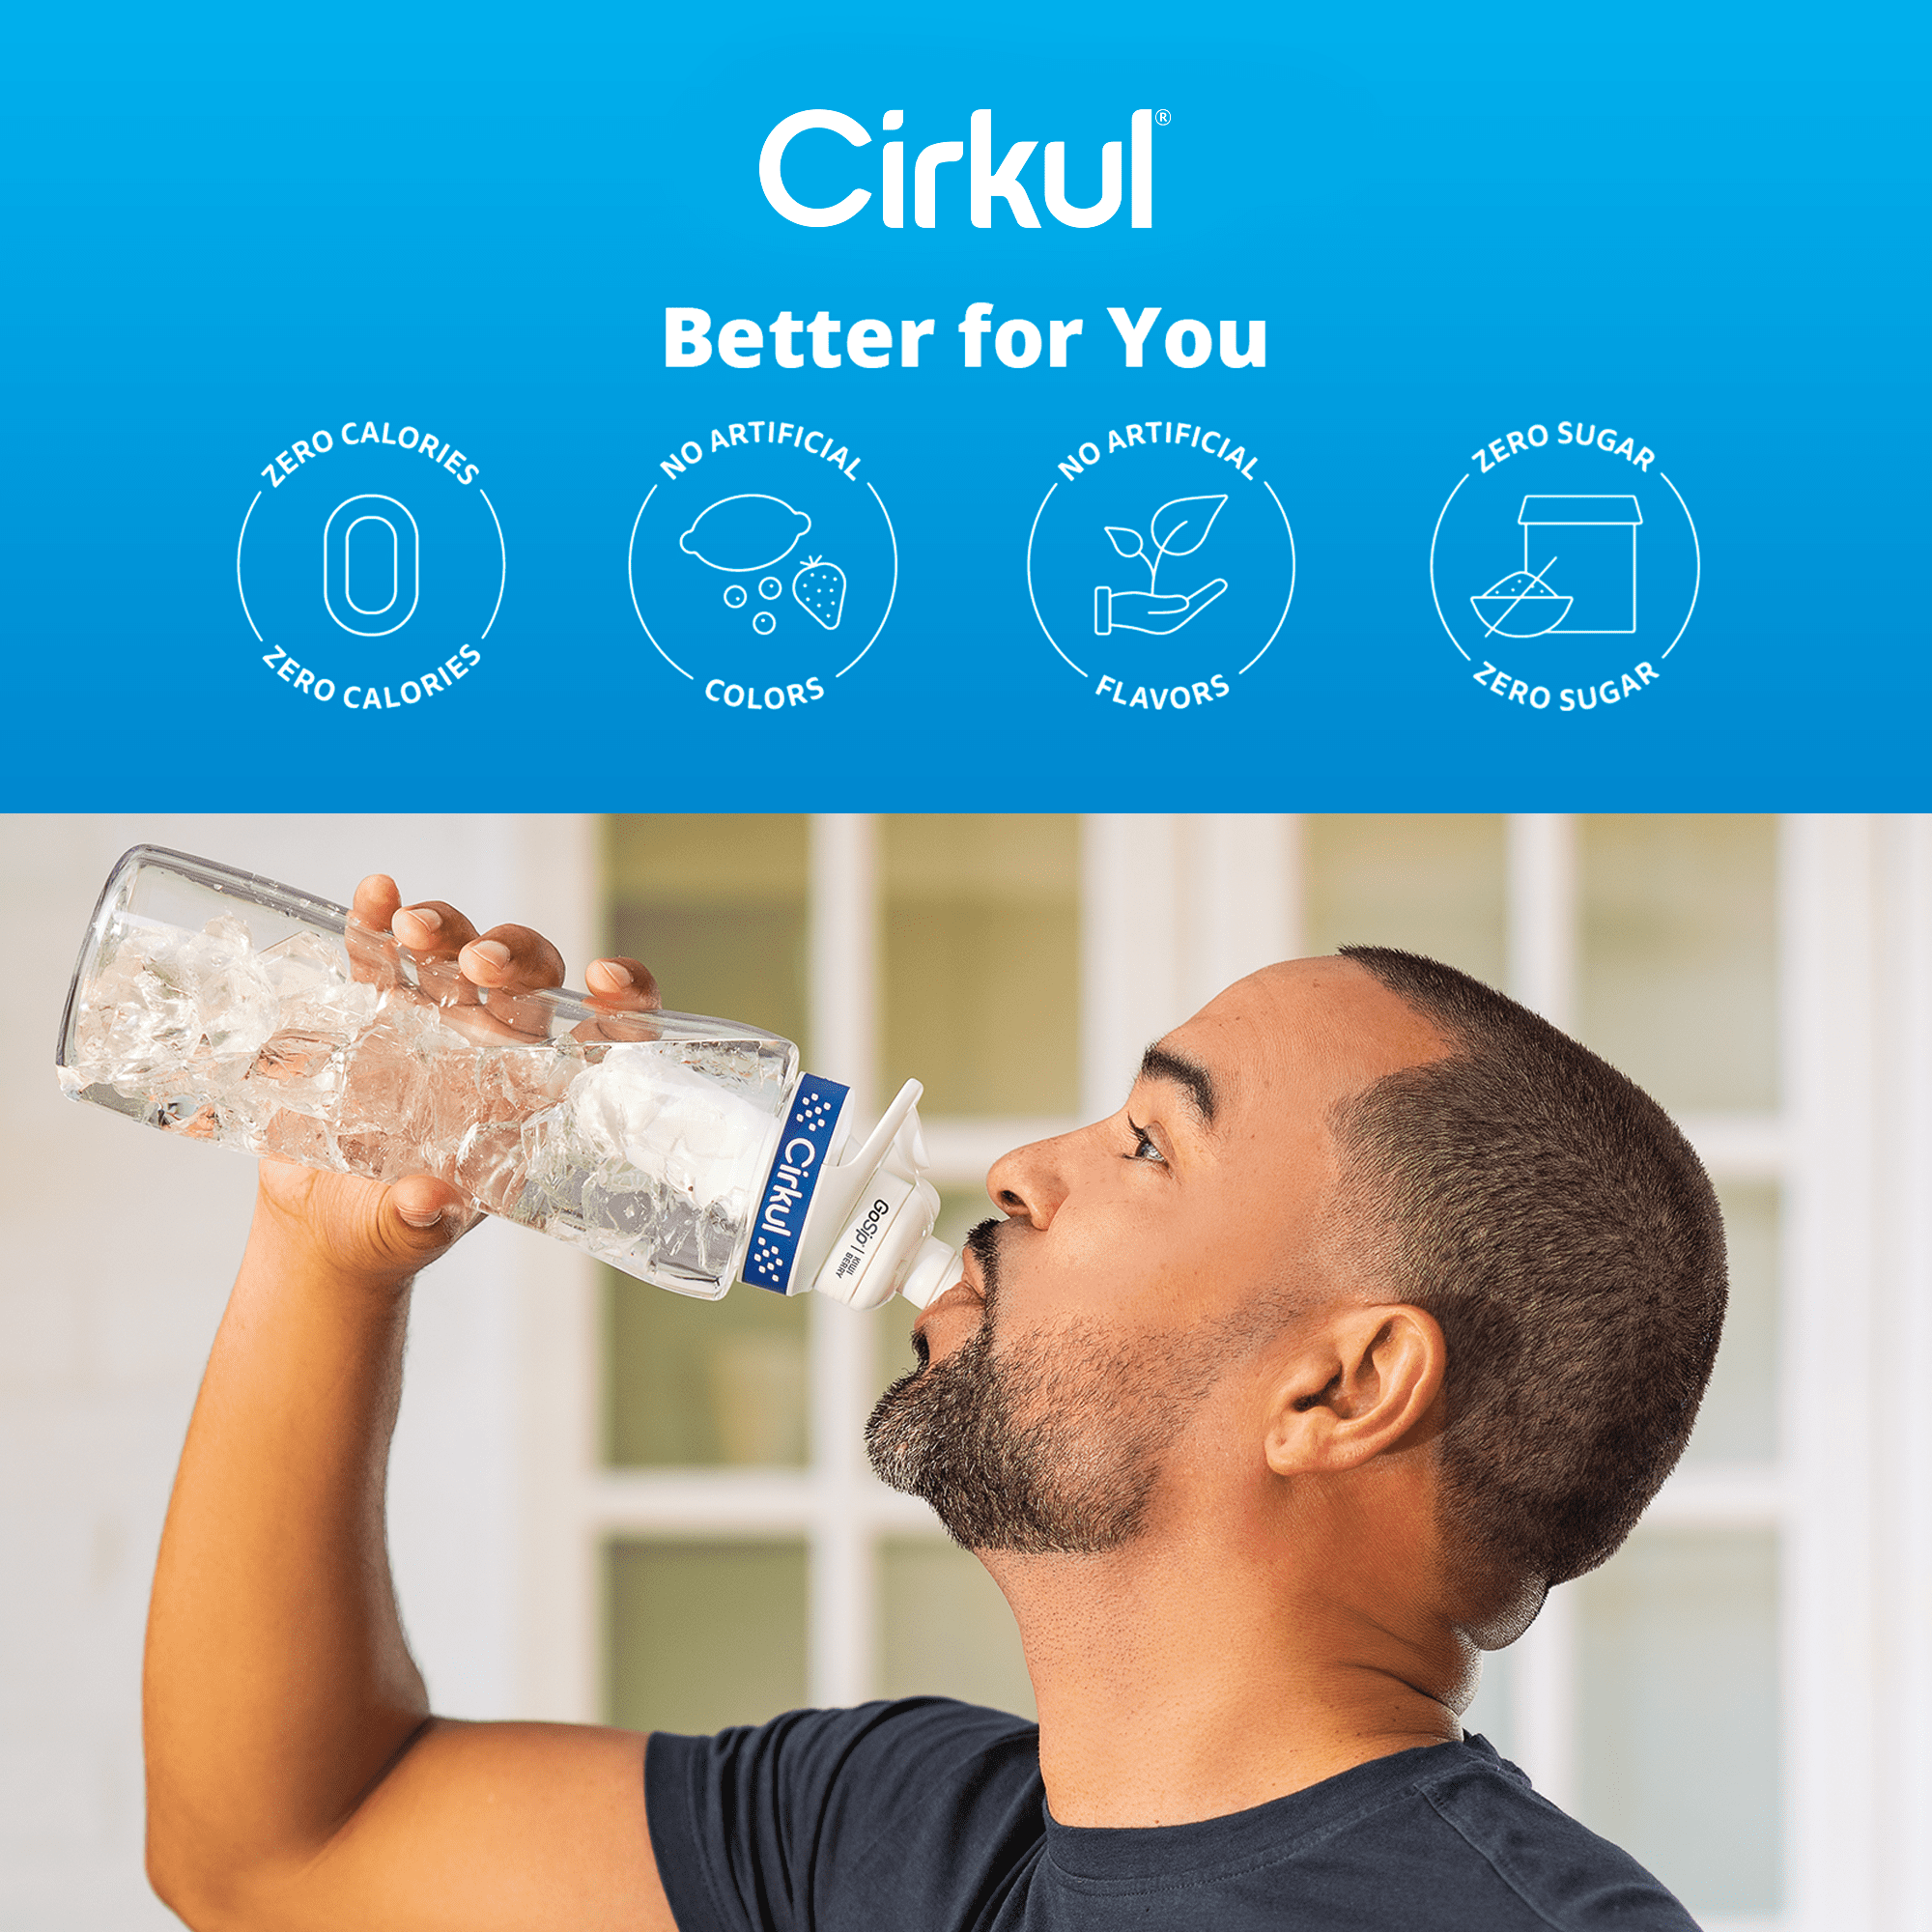  Cirkul 12 oz Plastic Water Bottle Starter Kit with Blue Lid and  2 Flavor Cartridges (Fruit Punch & Mixed Berry) : Home & Kitchen